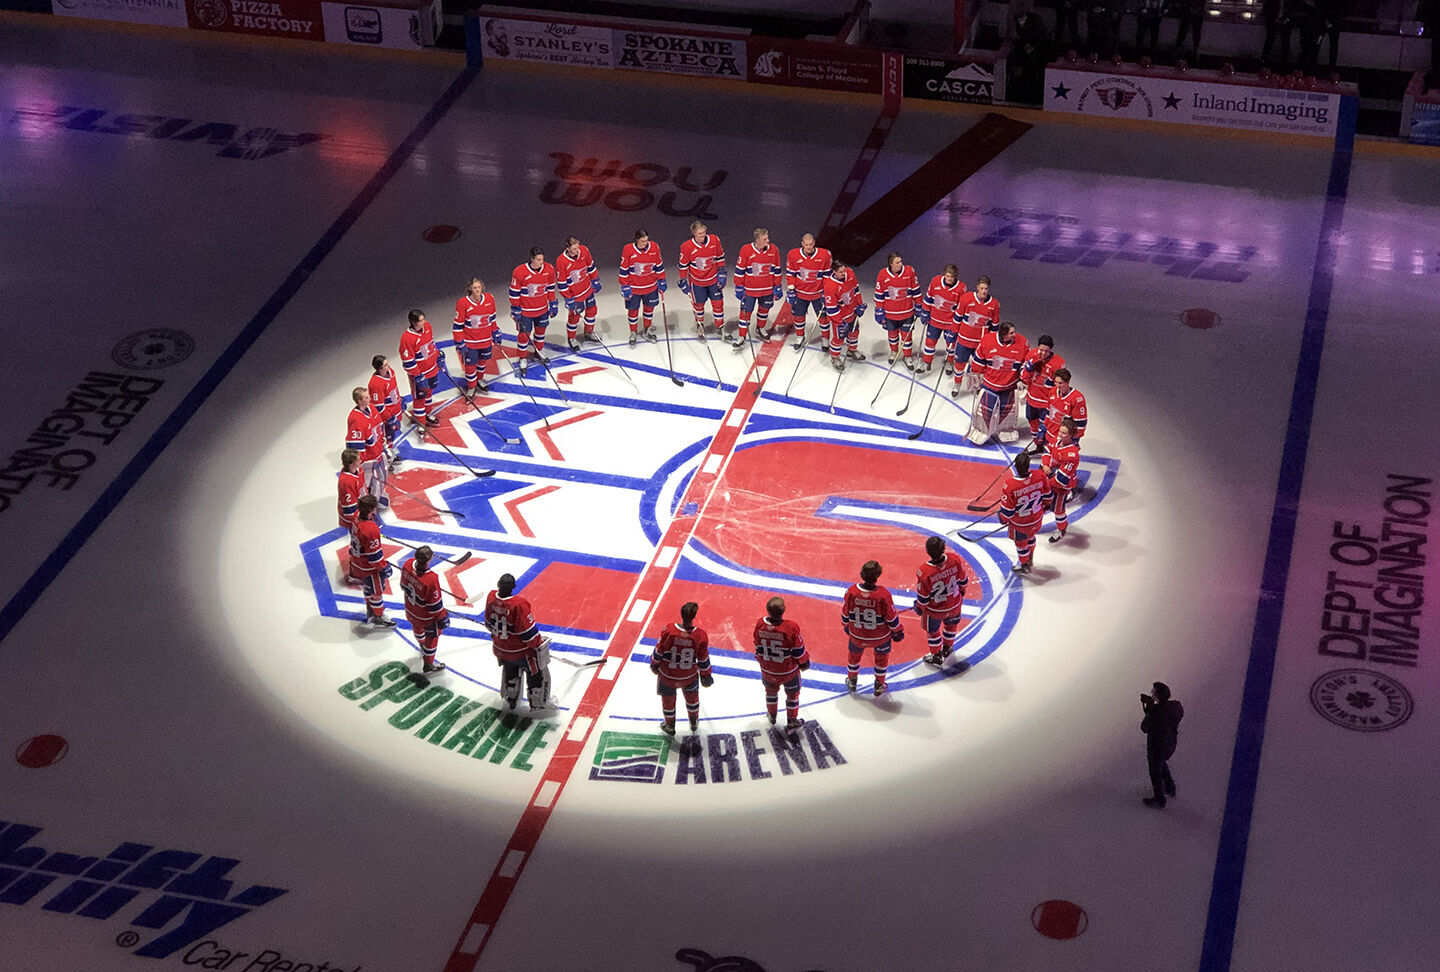 Fueled by double-major penalties, Tri-City Americans surge in third period to top Spokane Chiefs Spokane Chiefs khq